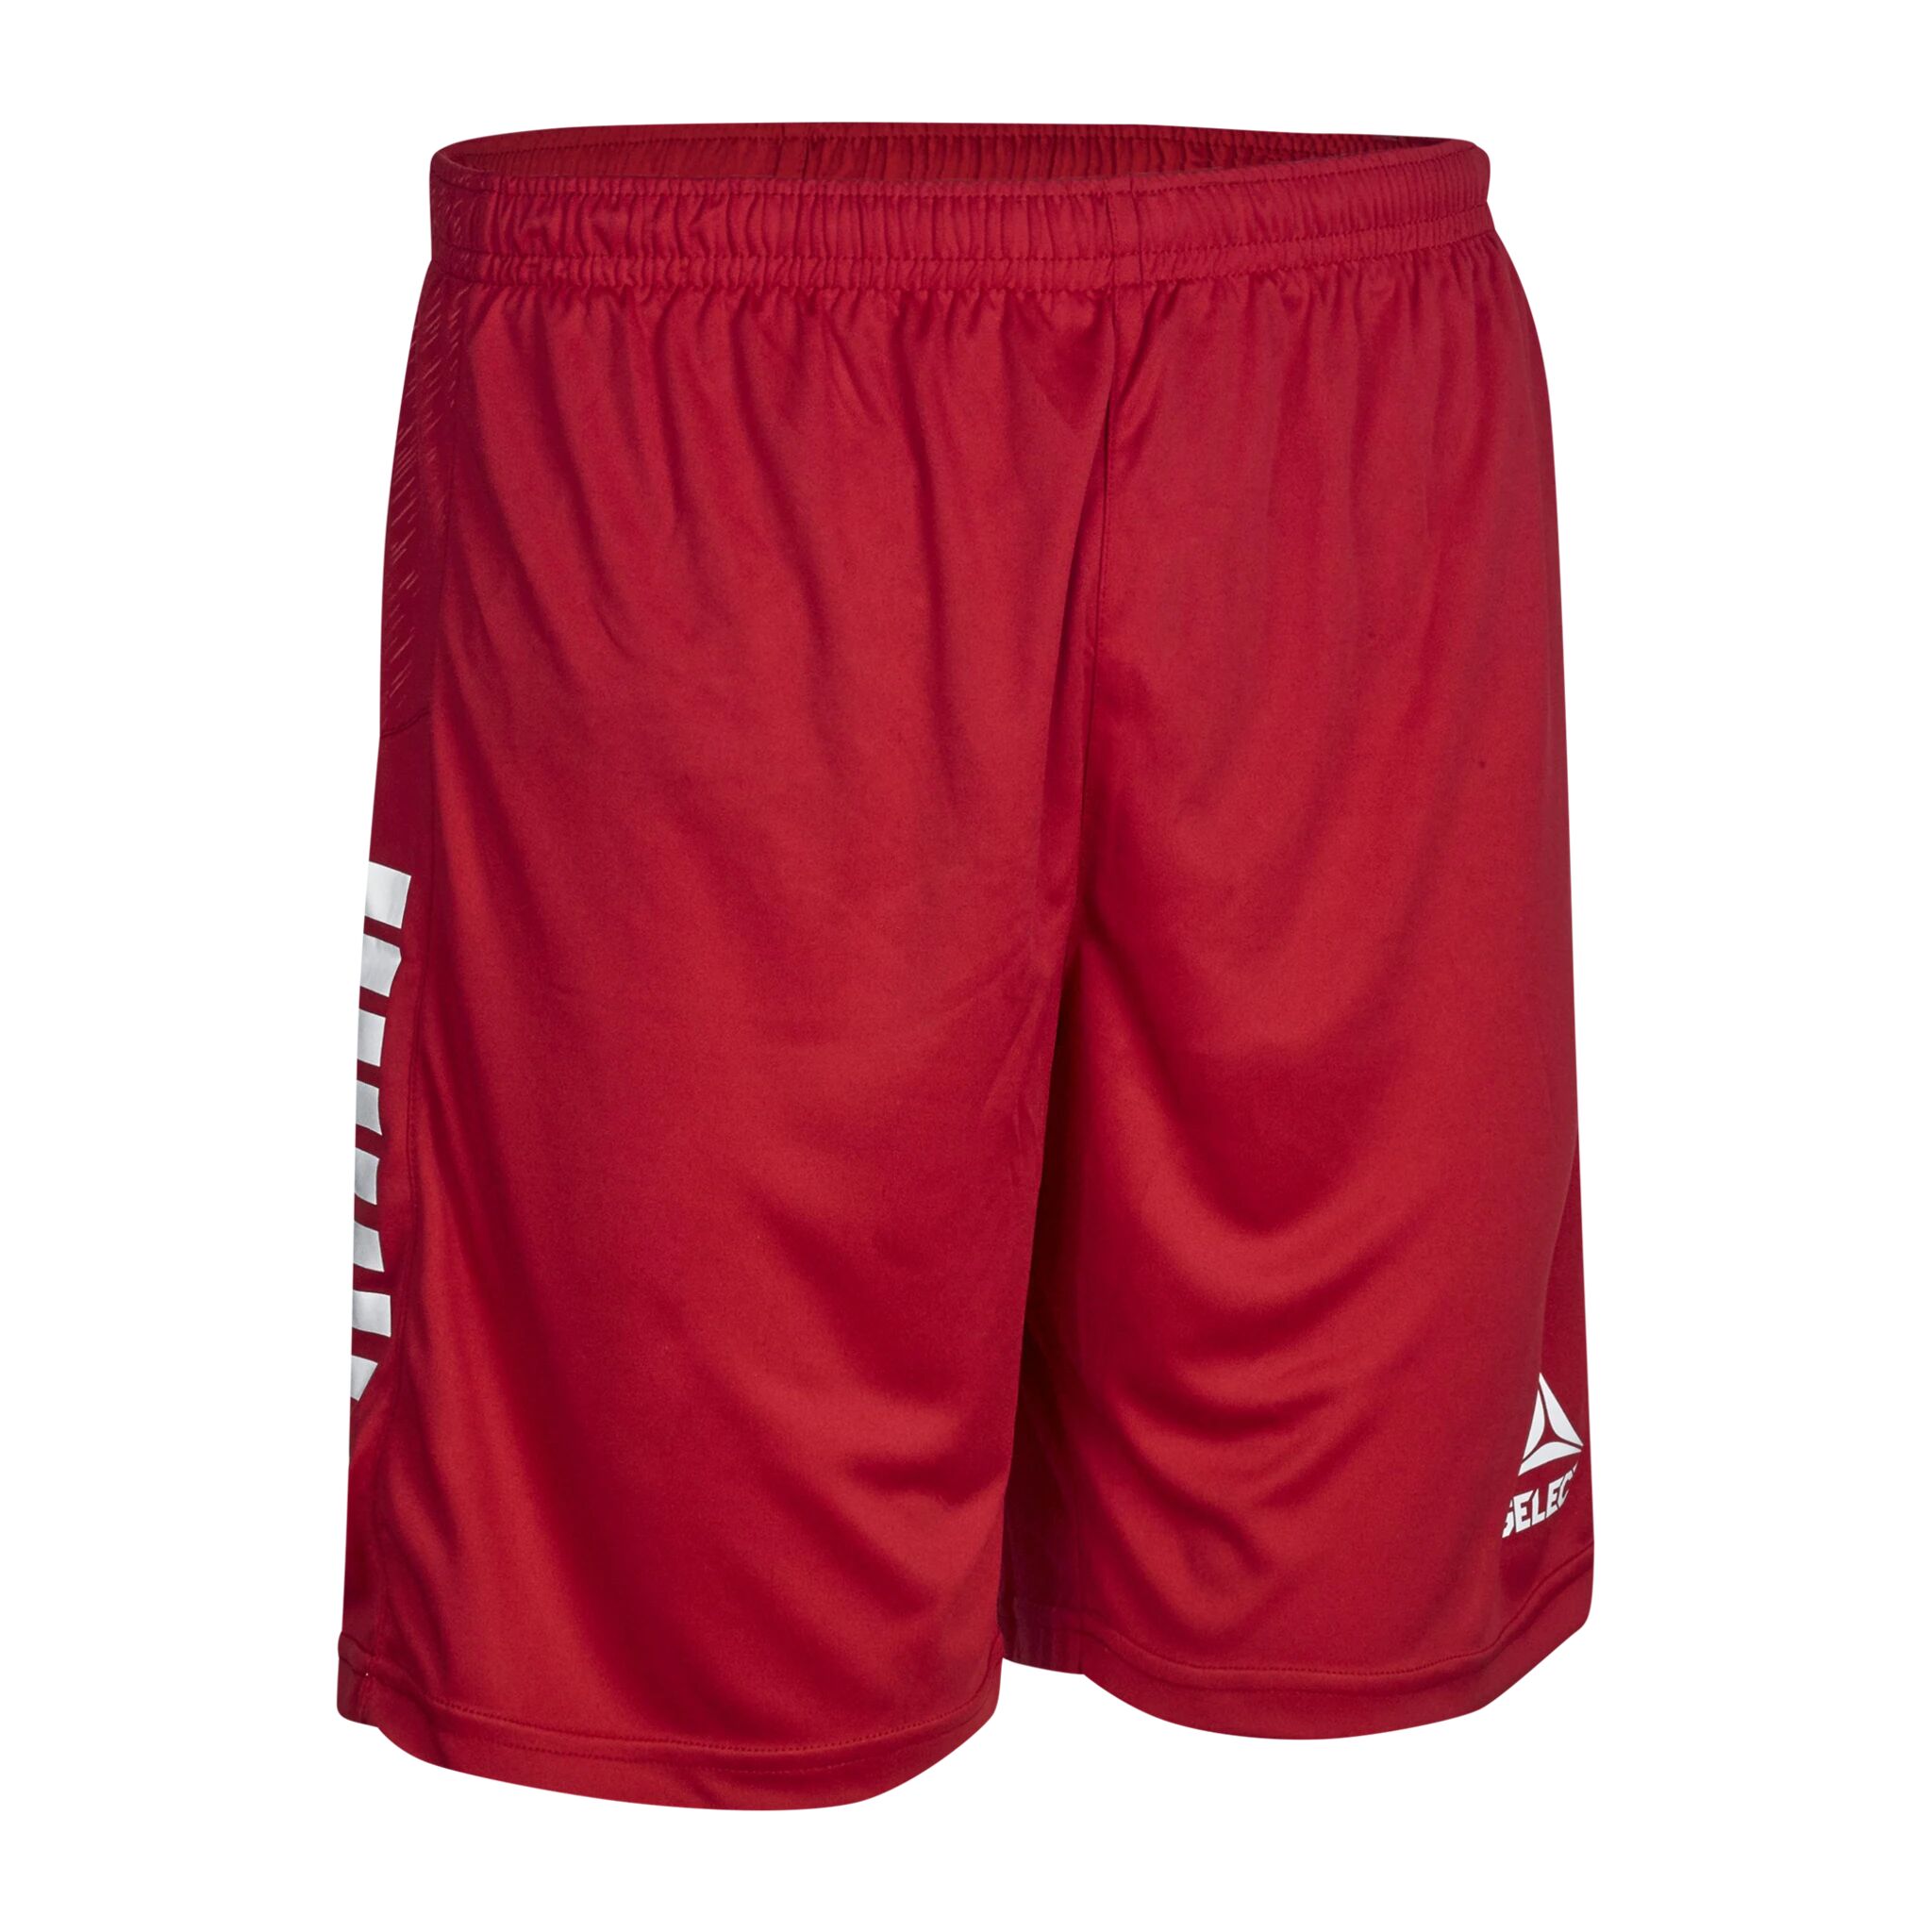 Select Player shorts Spain, shorts unisex XXL RED